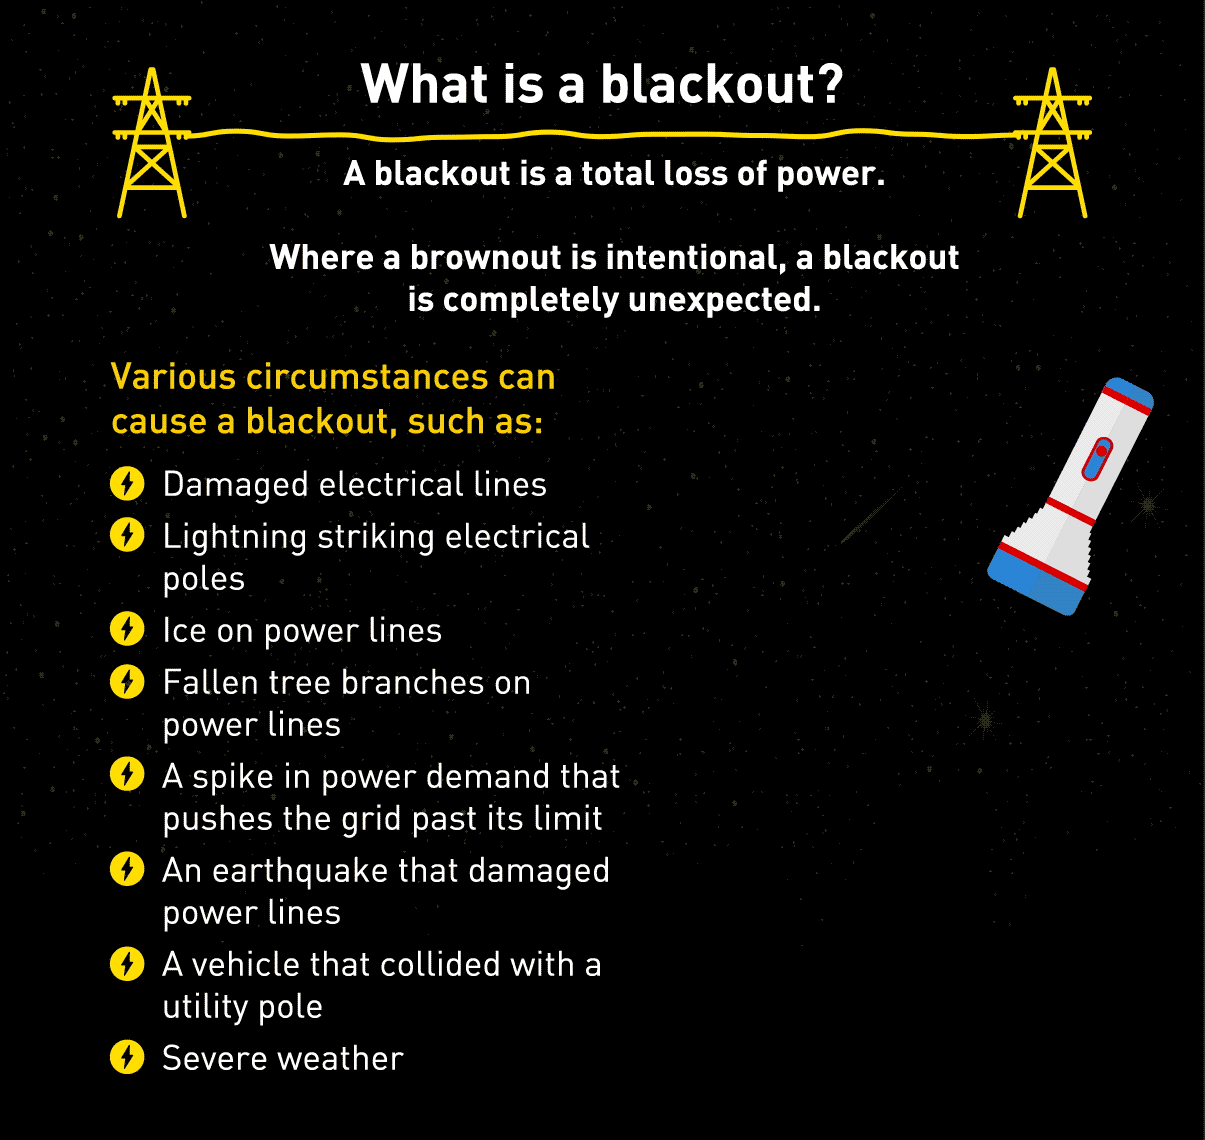 Brownout vs. Blackout: What's The Difference?